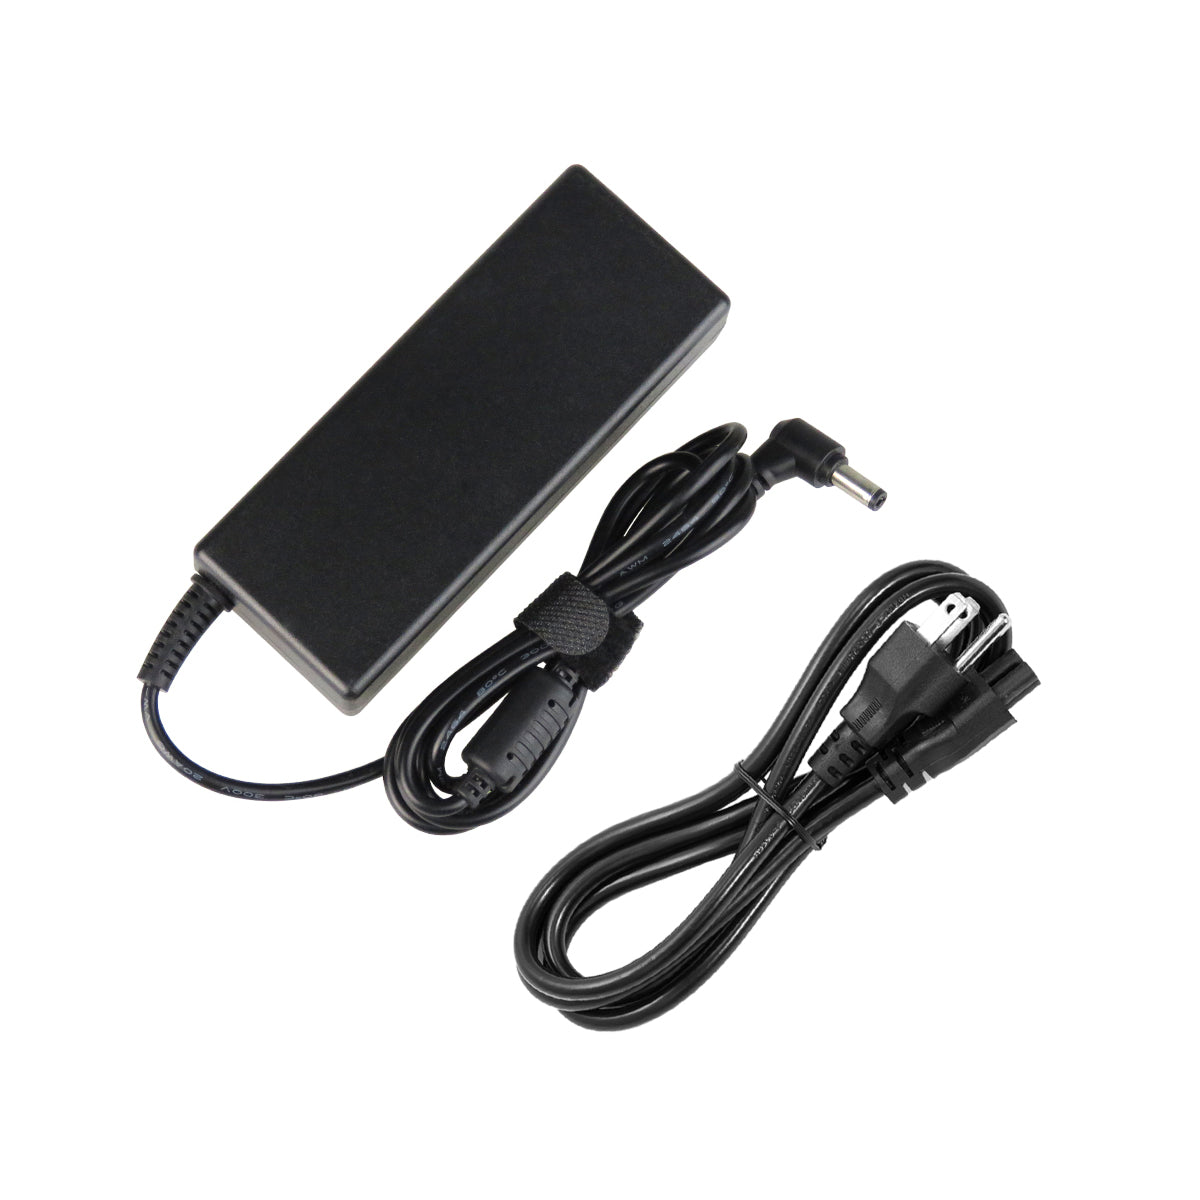 AC Adapter Charger for ASUS A46CA Notebook.